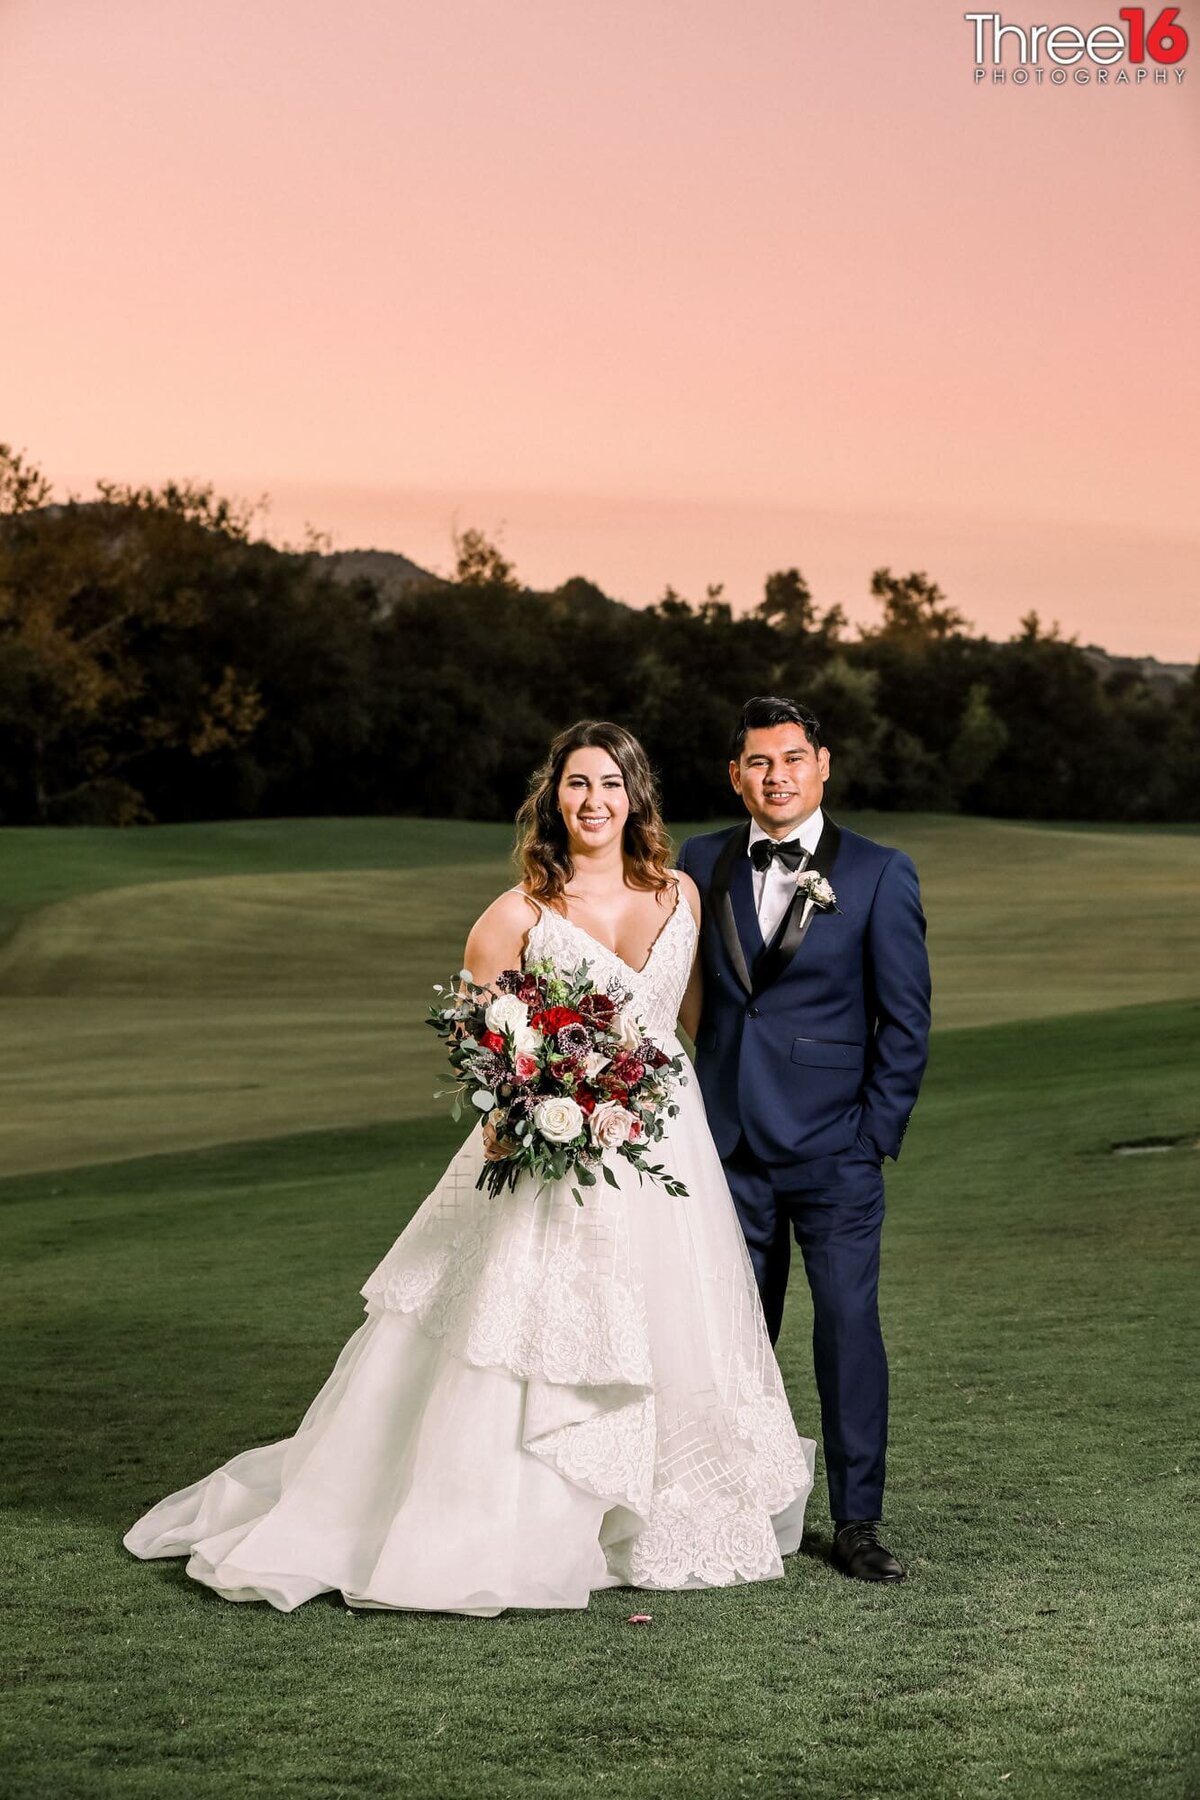 Newly married couple pose together on the golf course at the Coto de Caza Golf & Racquet Club